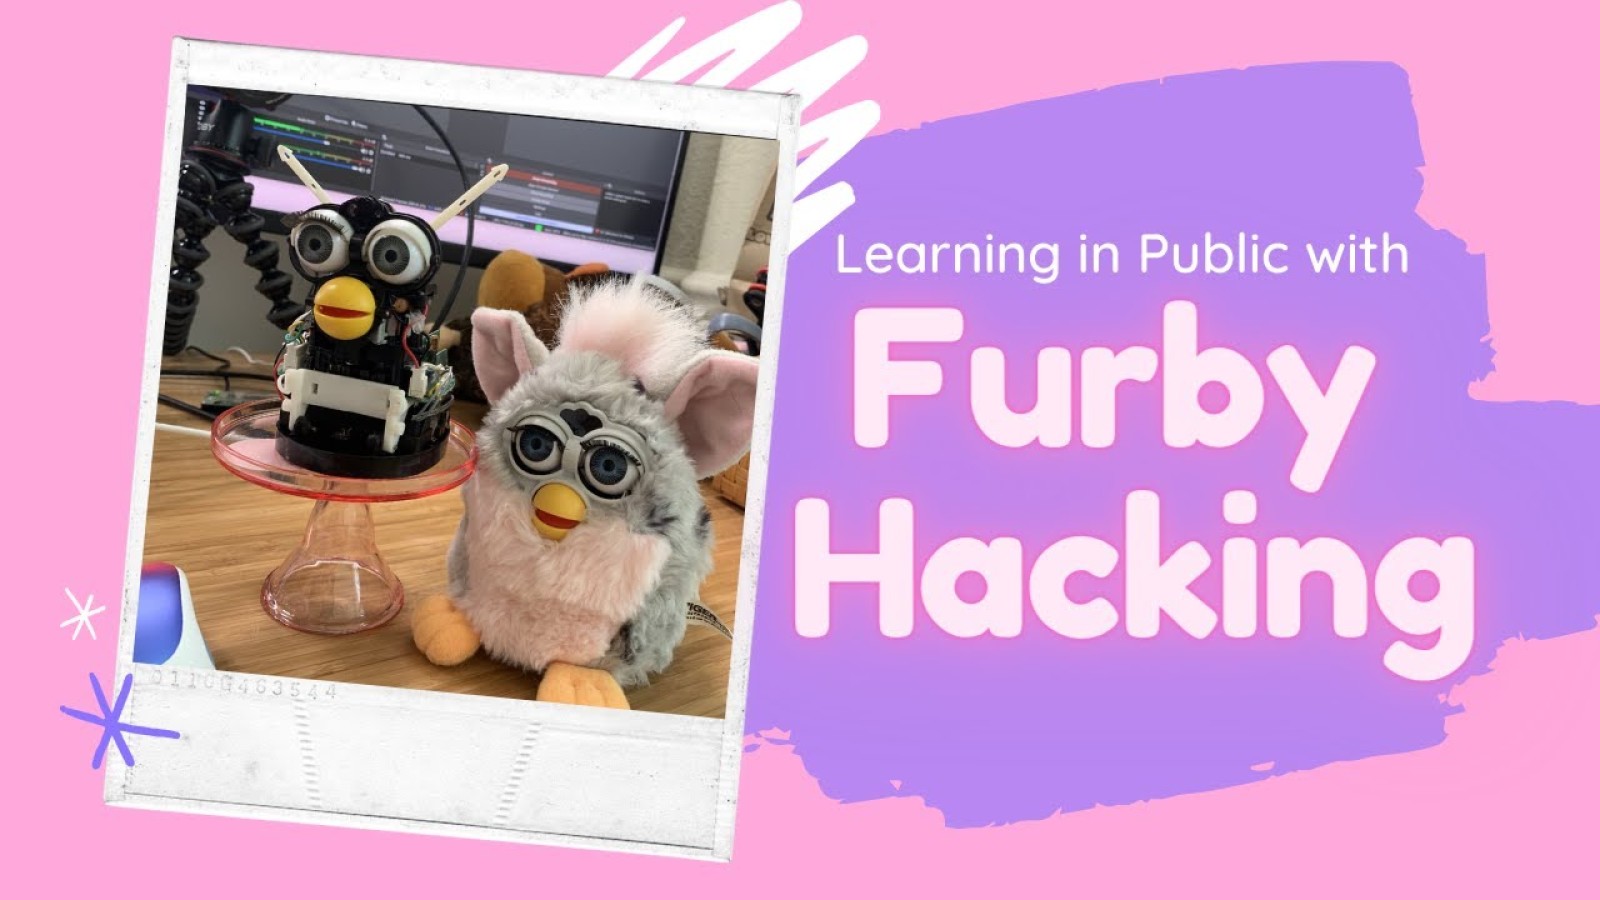 Learning in Public With Furby Hacking